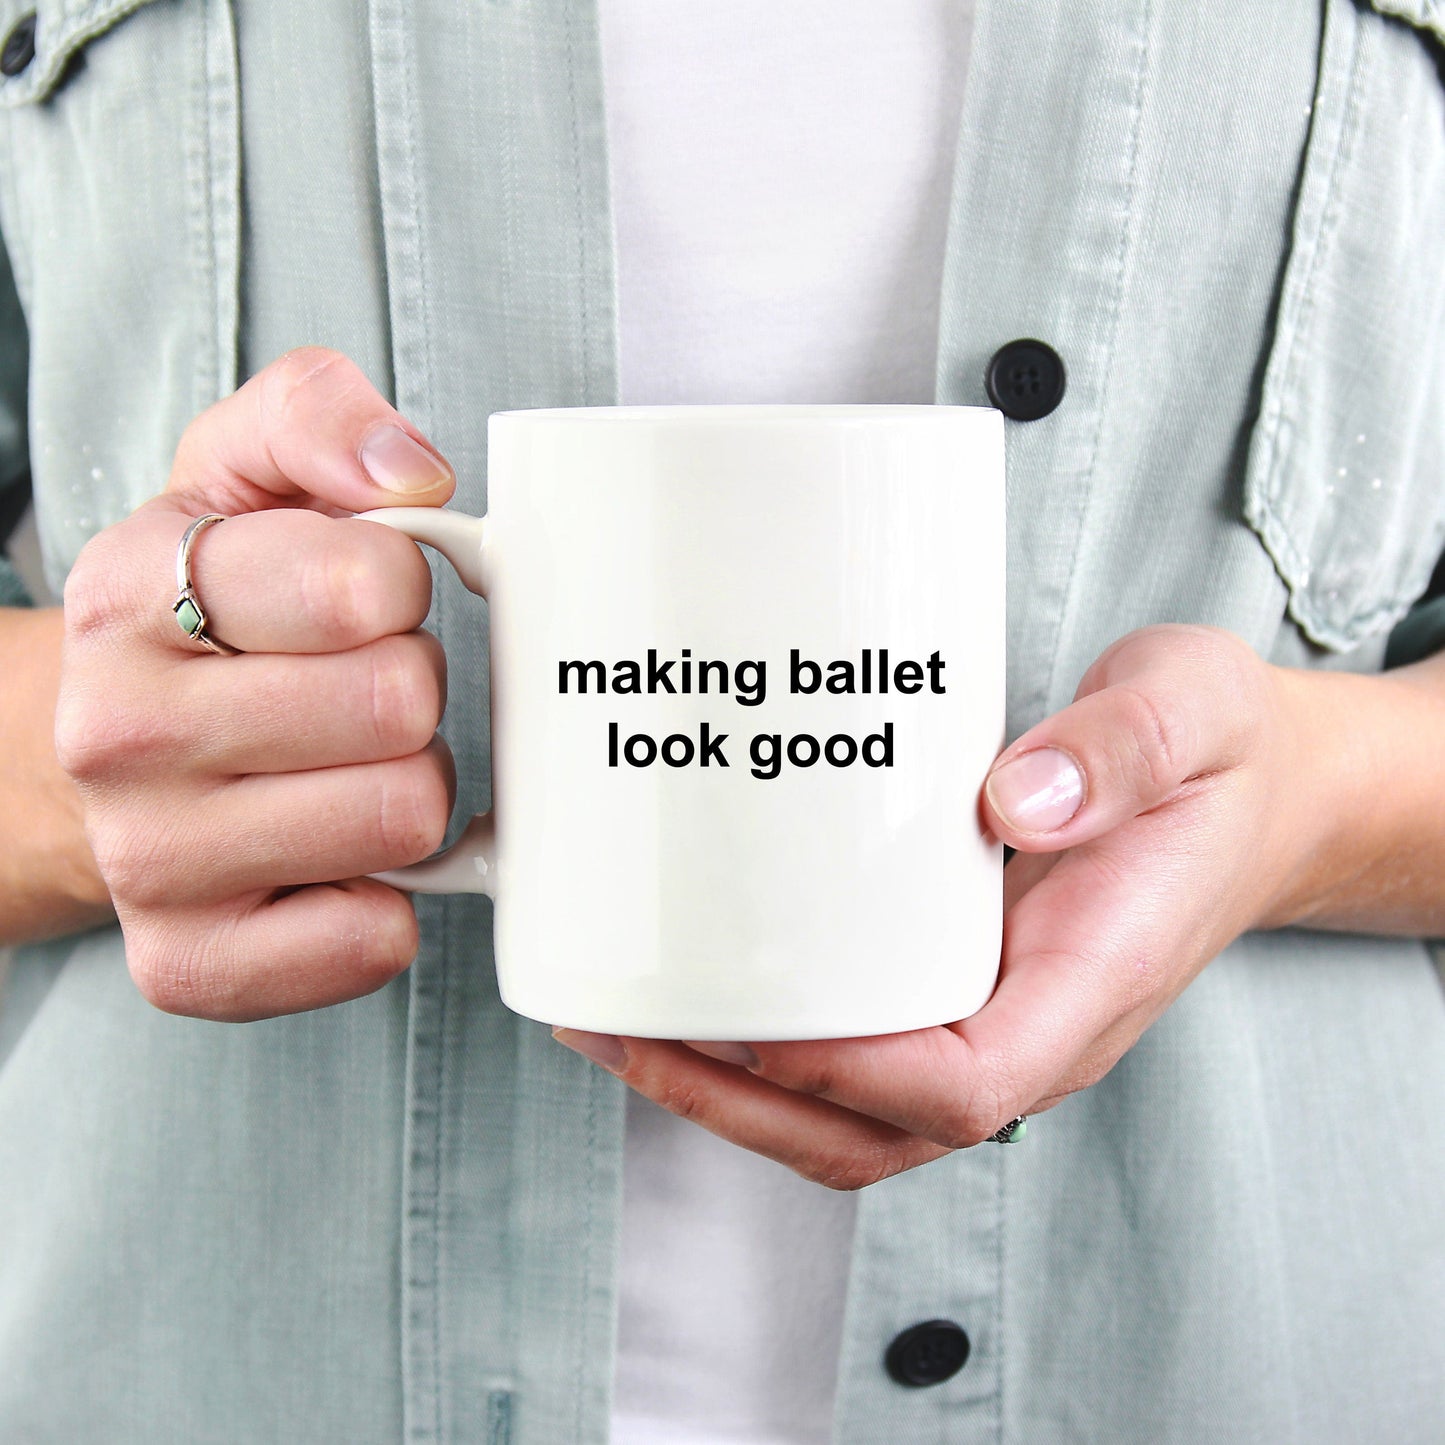 Making Ballet Look Good Funny Novelty Coffee Mug Makes a Great Gift for a Dancer or Dance Teacher